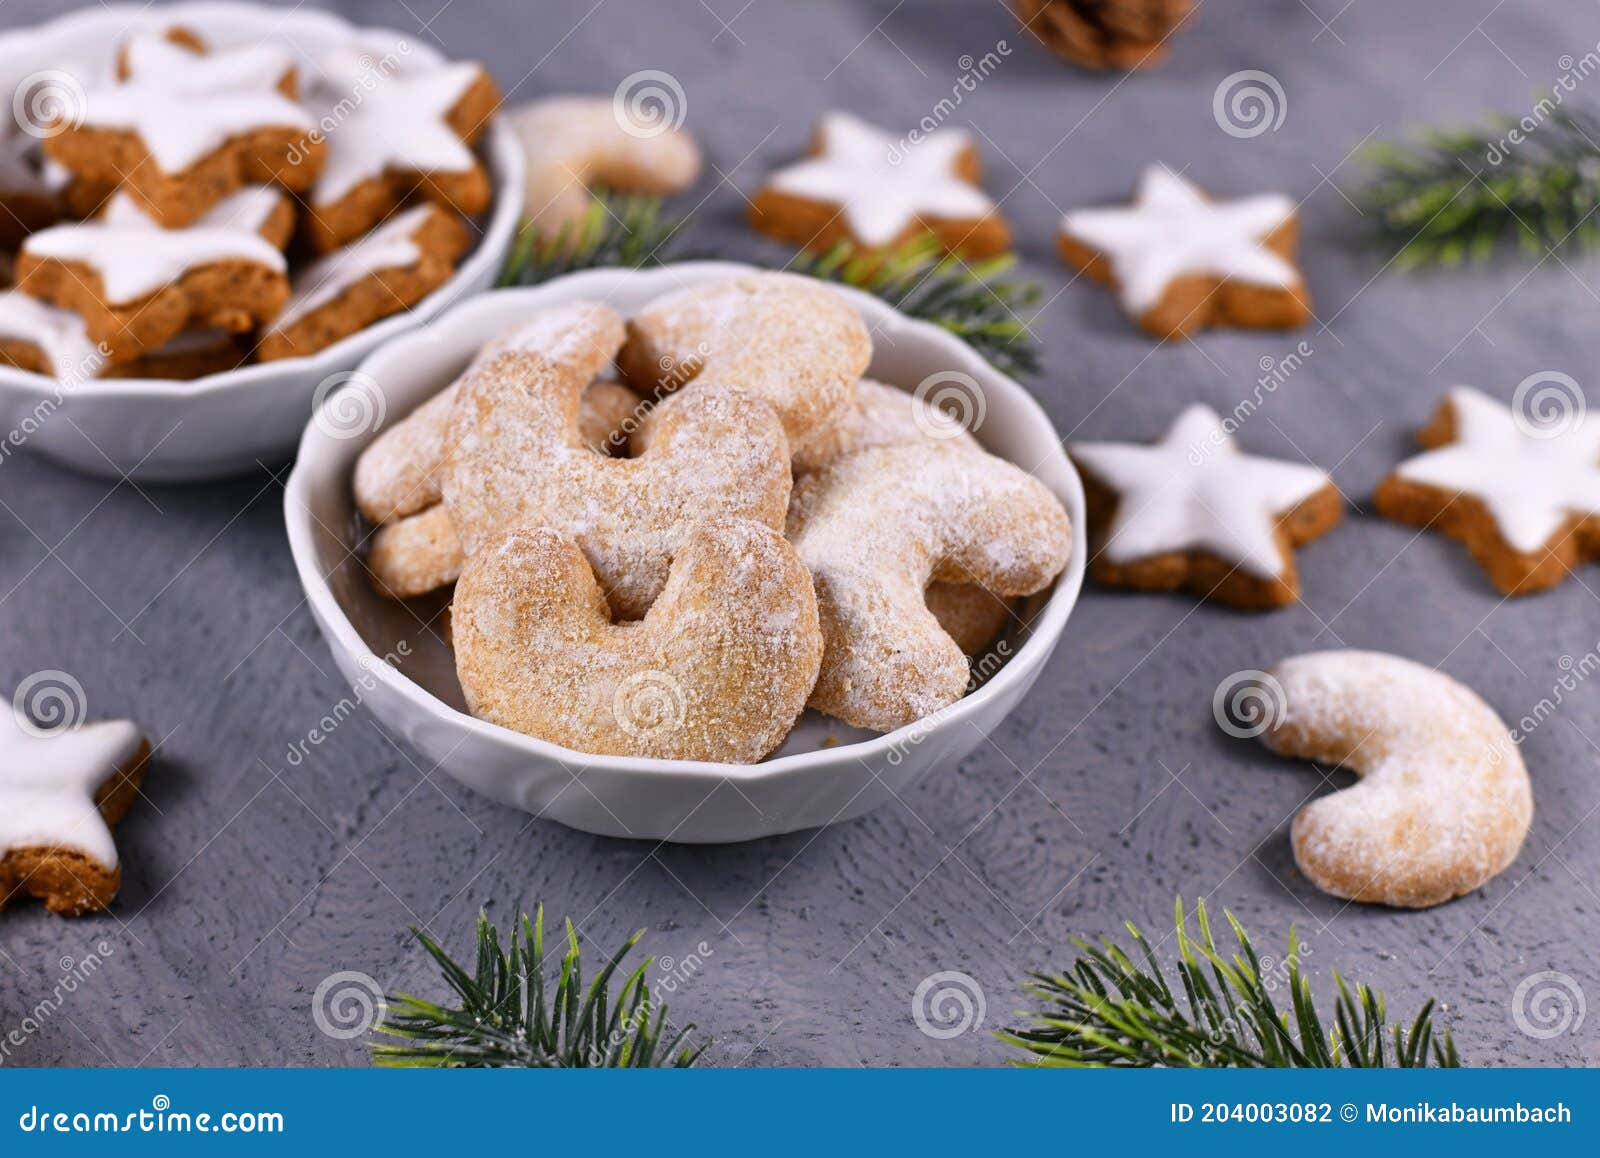 Crescent Shaped Christmas Cookies Called Vanillekipferl A Traditional Austrian Or German Christmas Biscuits With Nuts And Icing Stock Photo Image Of Powdered Cookie 204003082